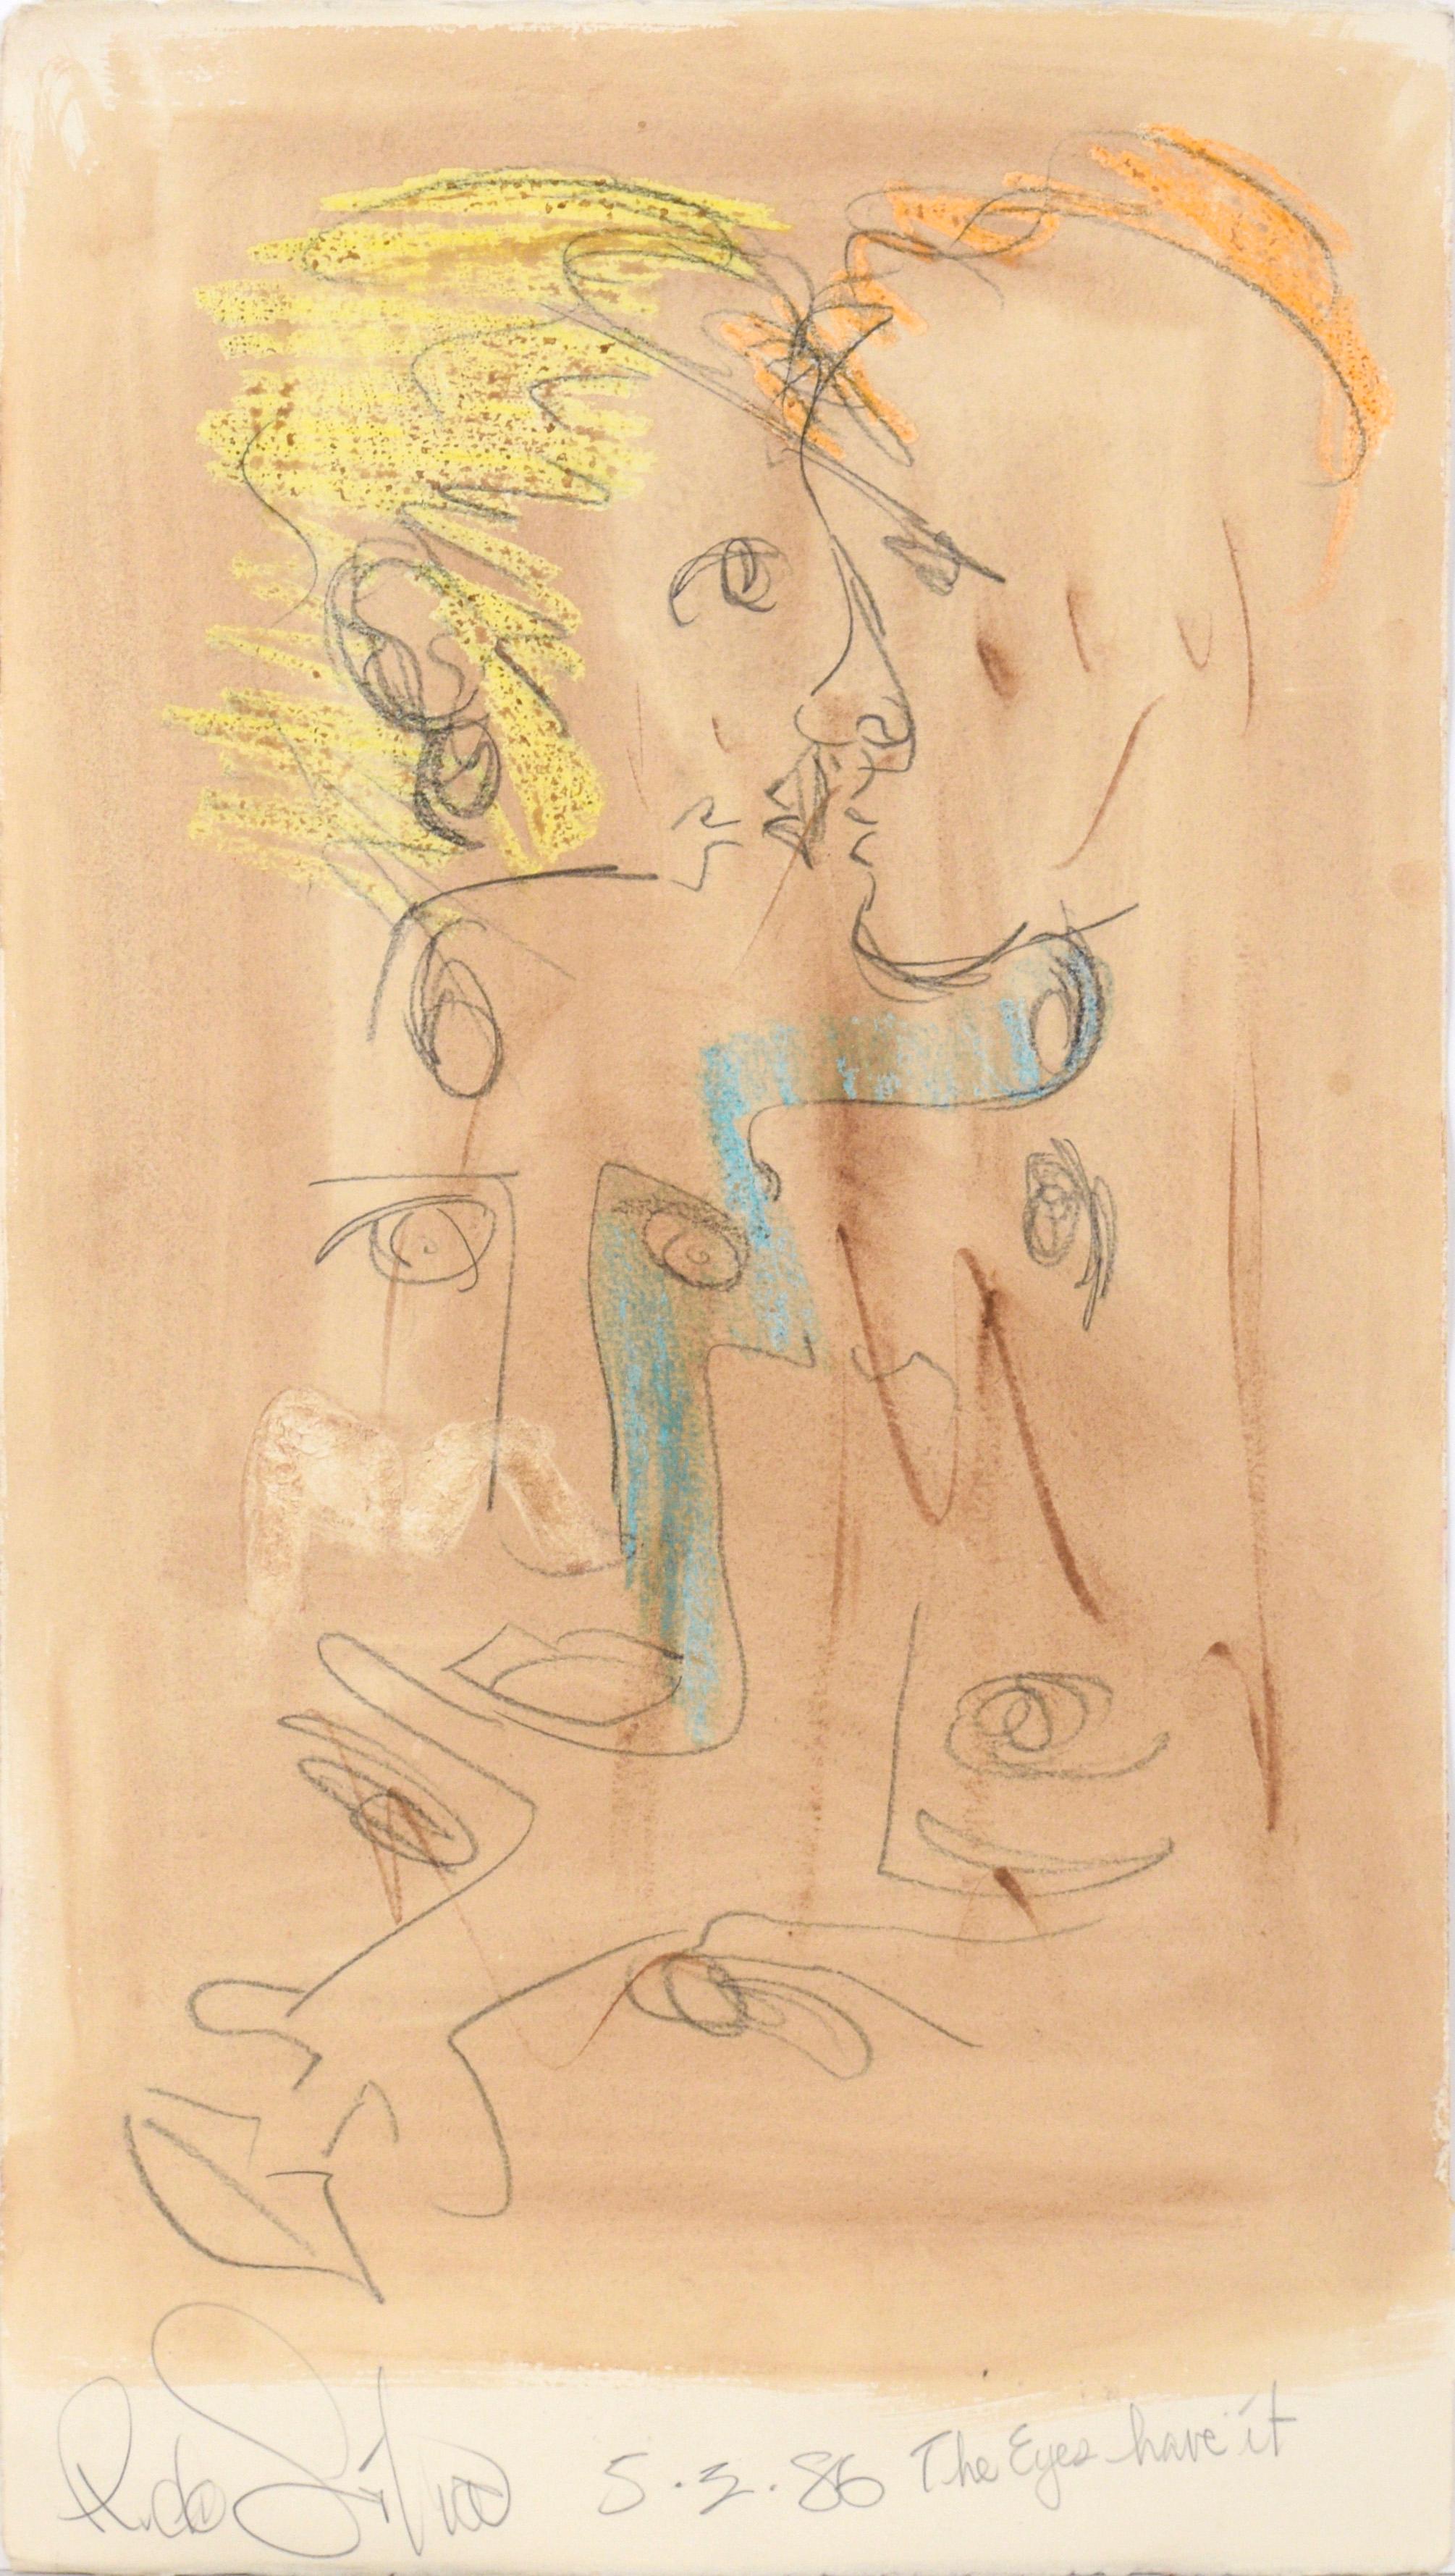 Ricardo de Silva Abstract Drawing - The Lovers "The Eyes Have It" Figurative Abstract Watercolor and Pencil on Paper